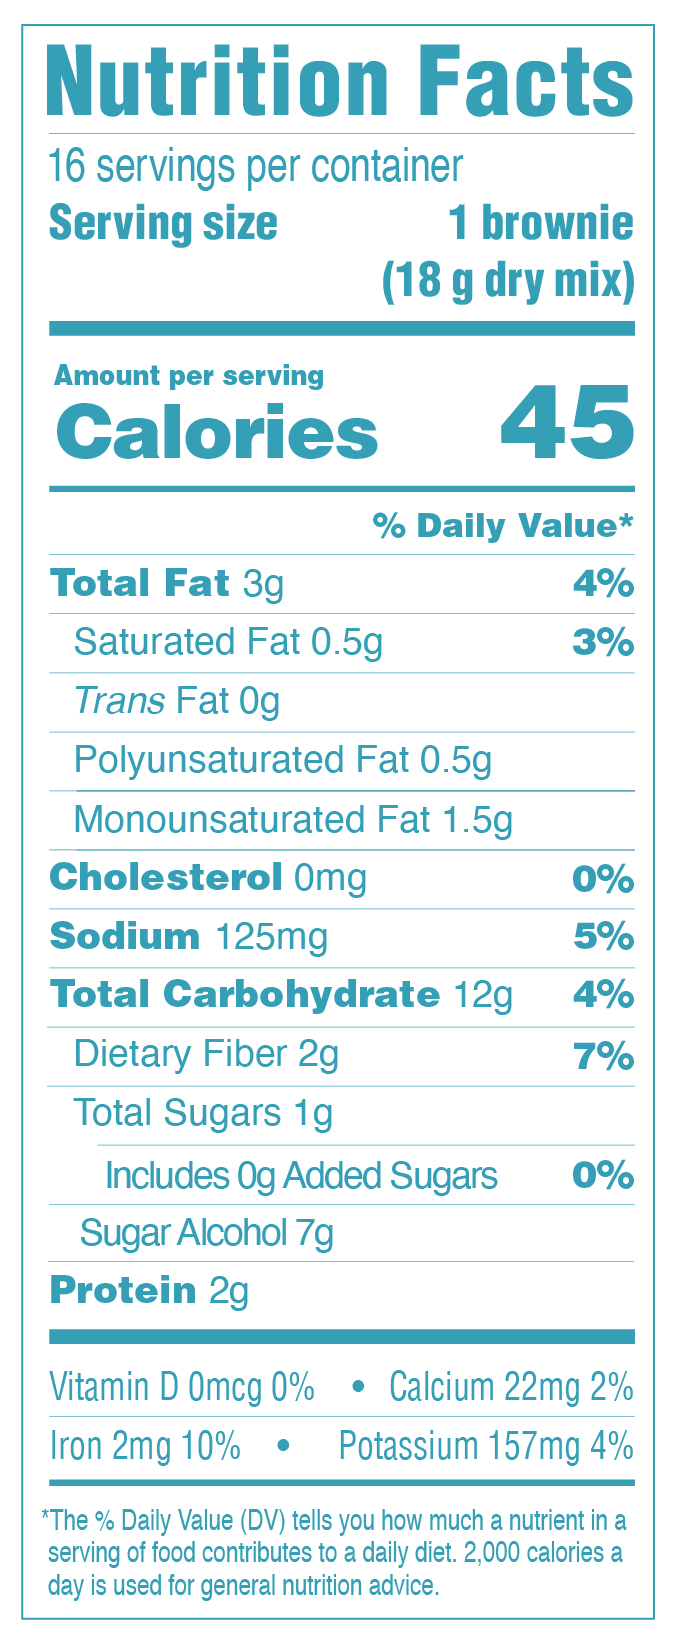 Brownie Mix Nutrition Facts